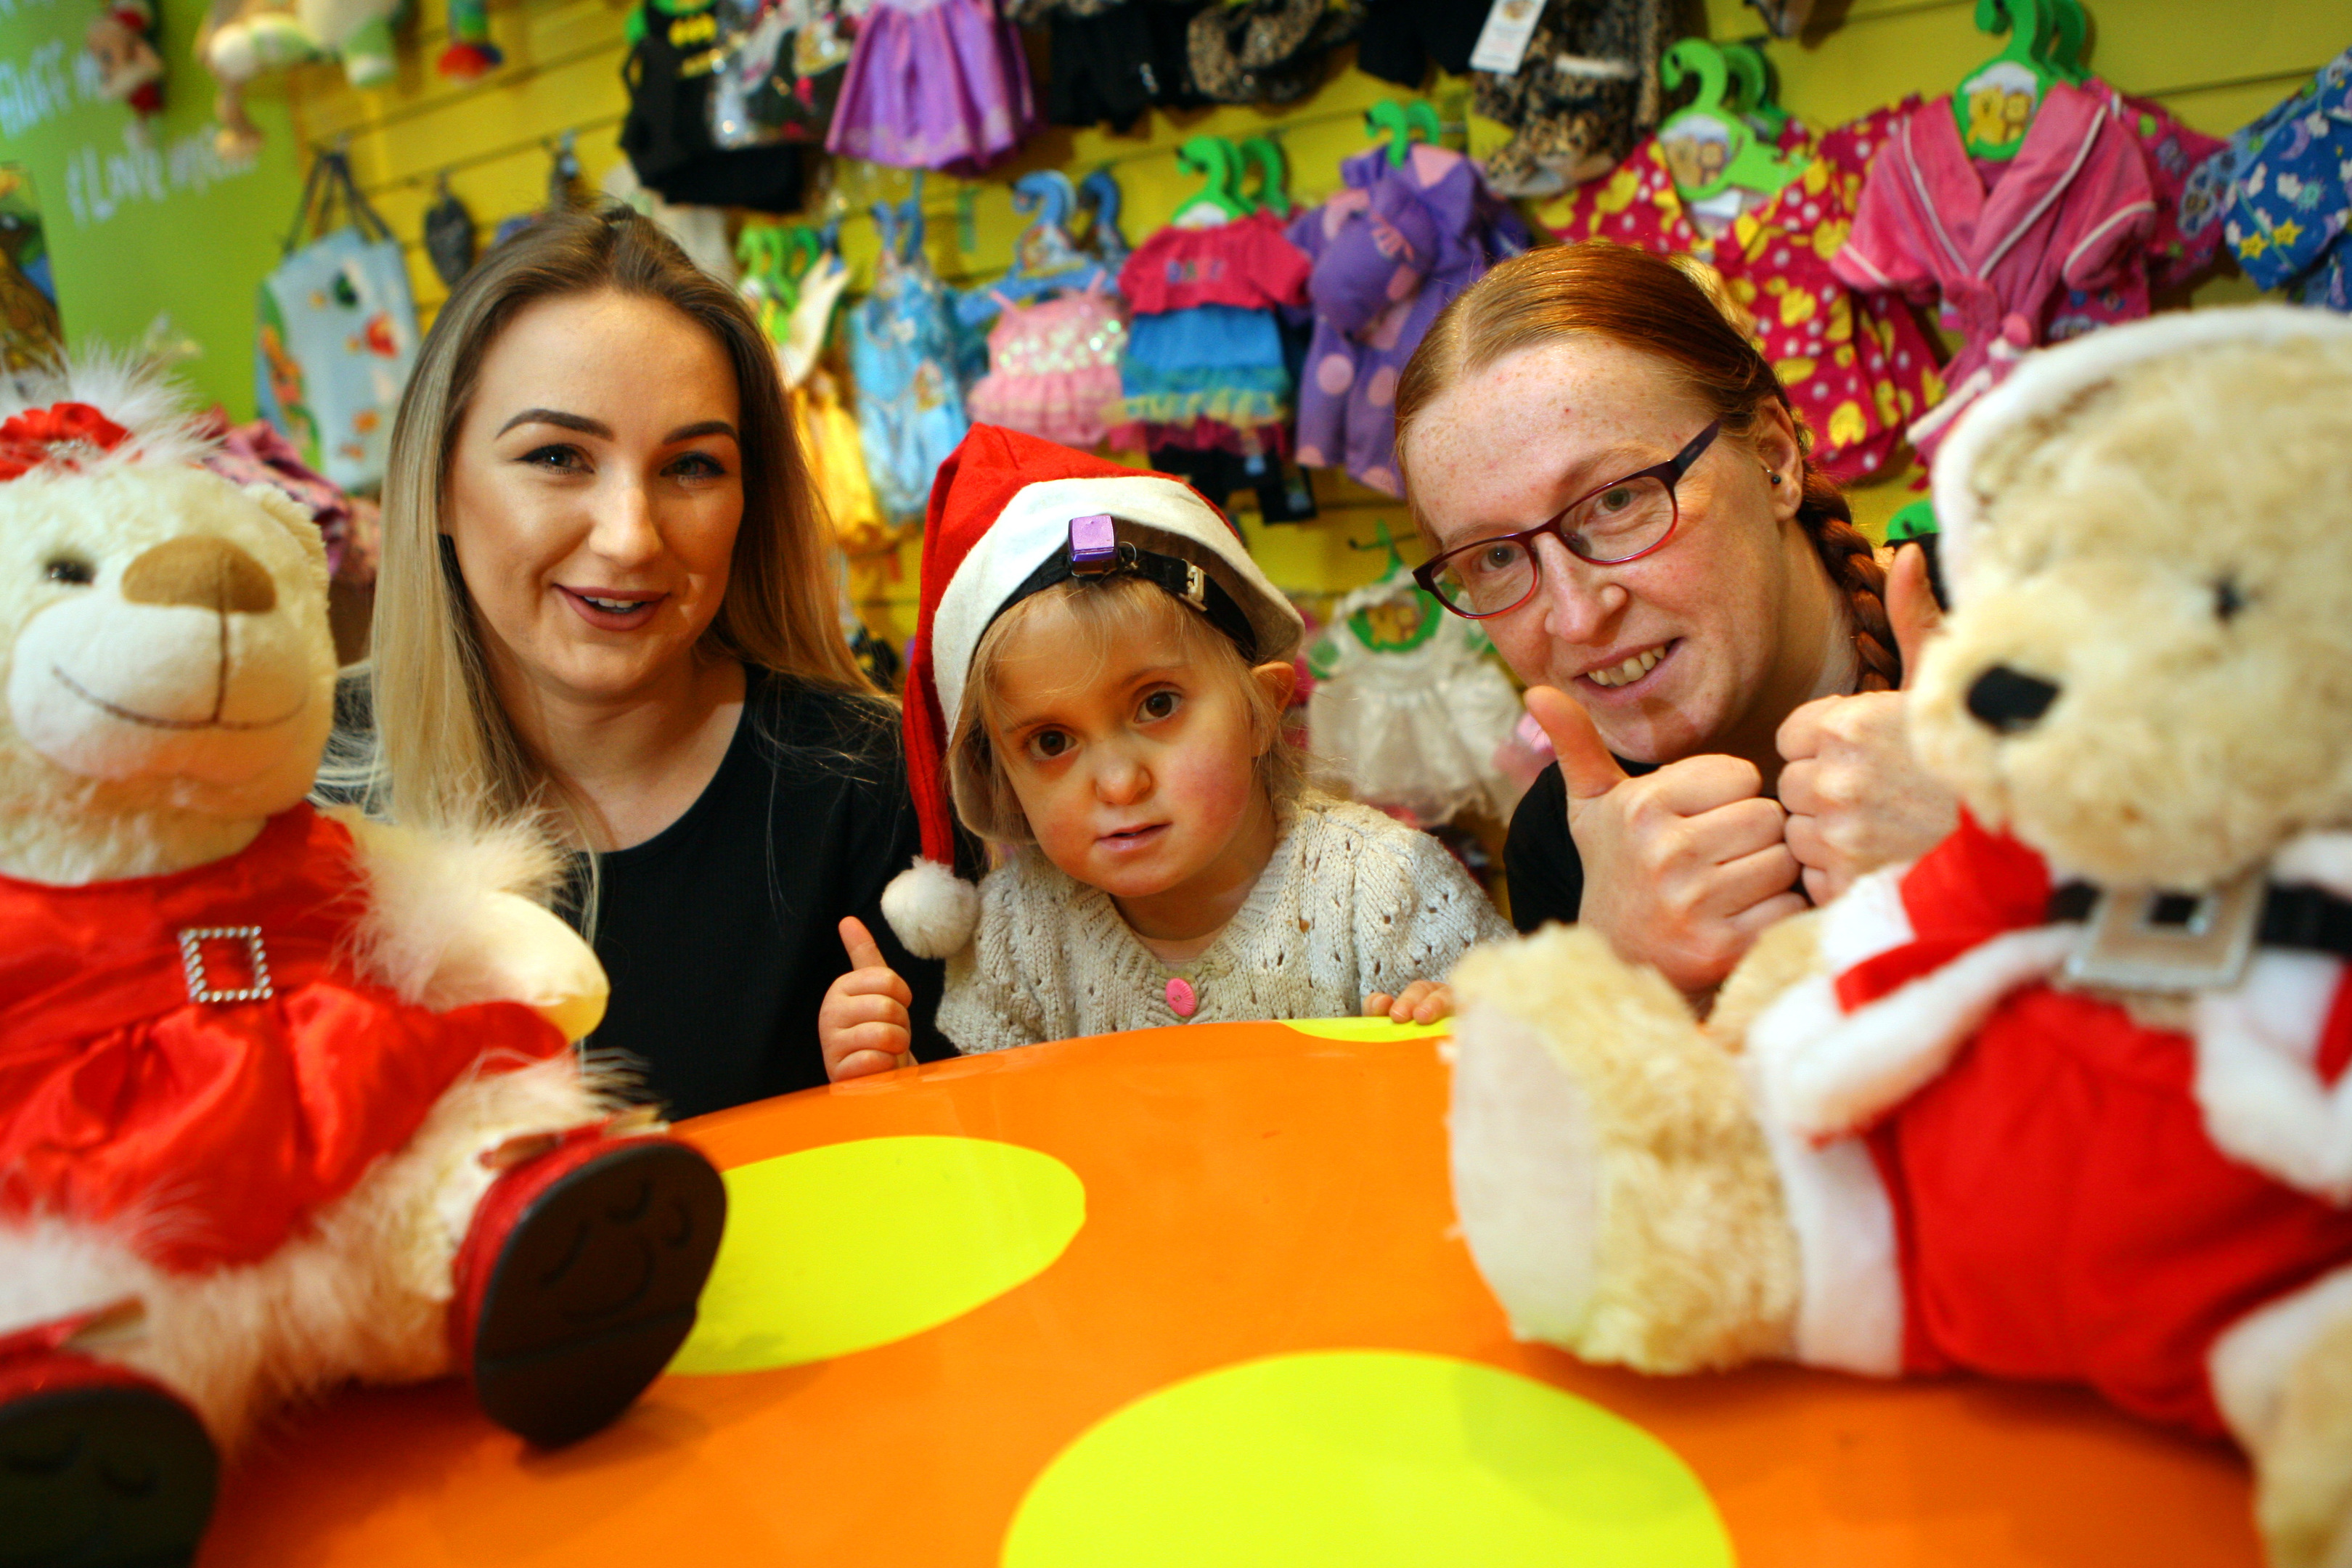 Lauren Arnot from Bears and Buddies Workshop with Mum Leanne and daughter Robyn